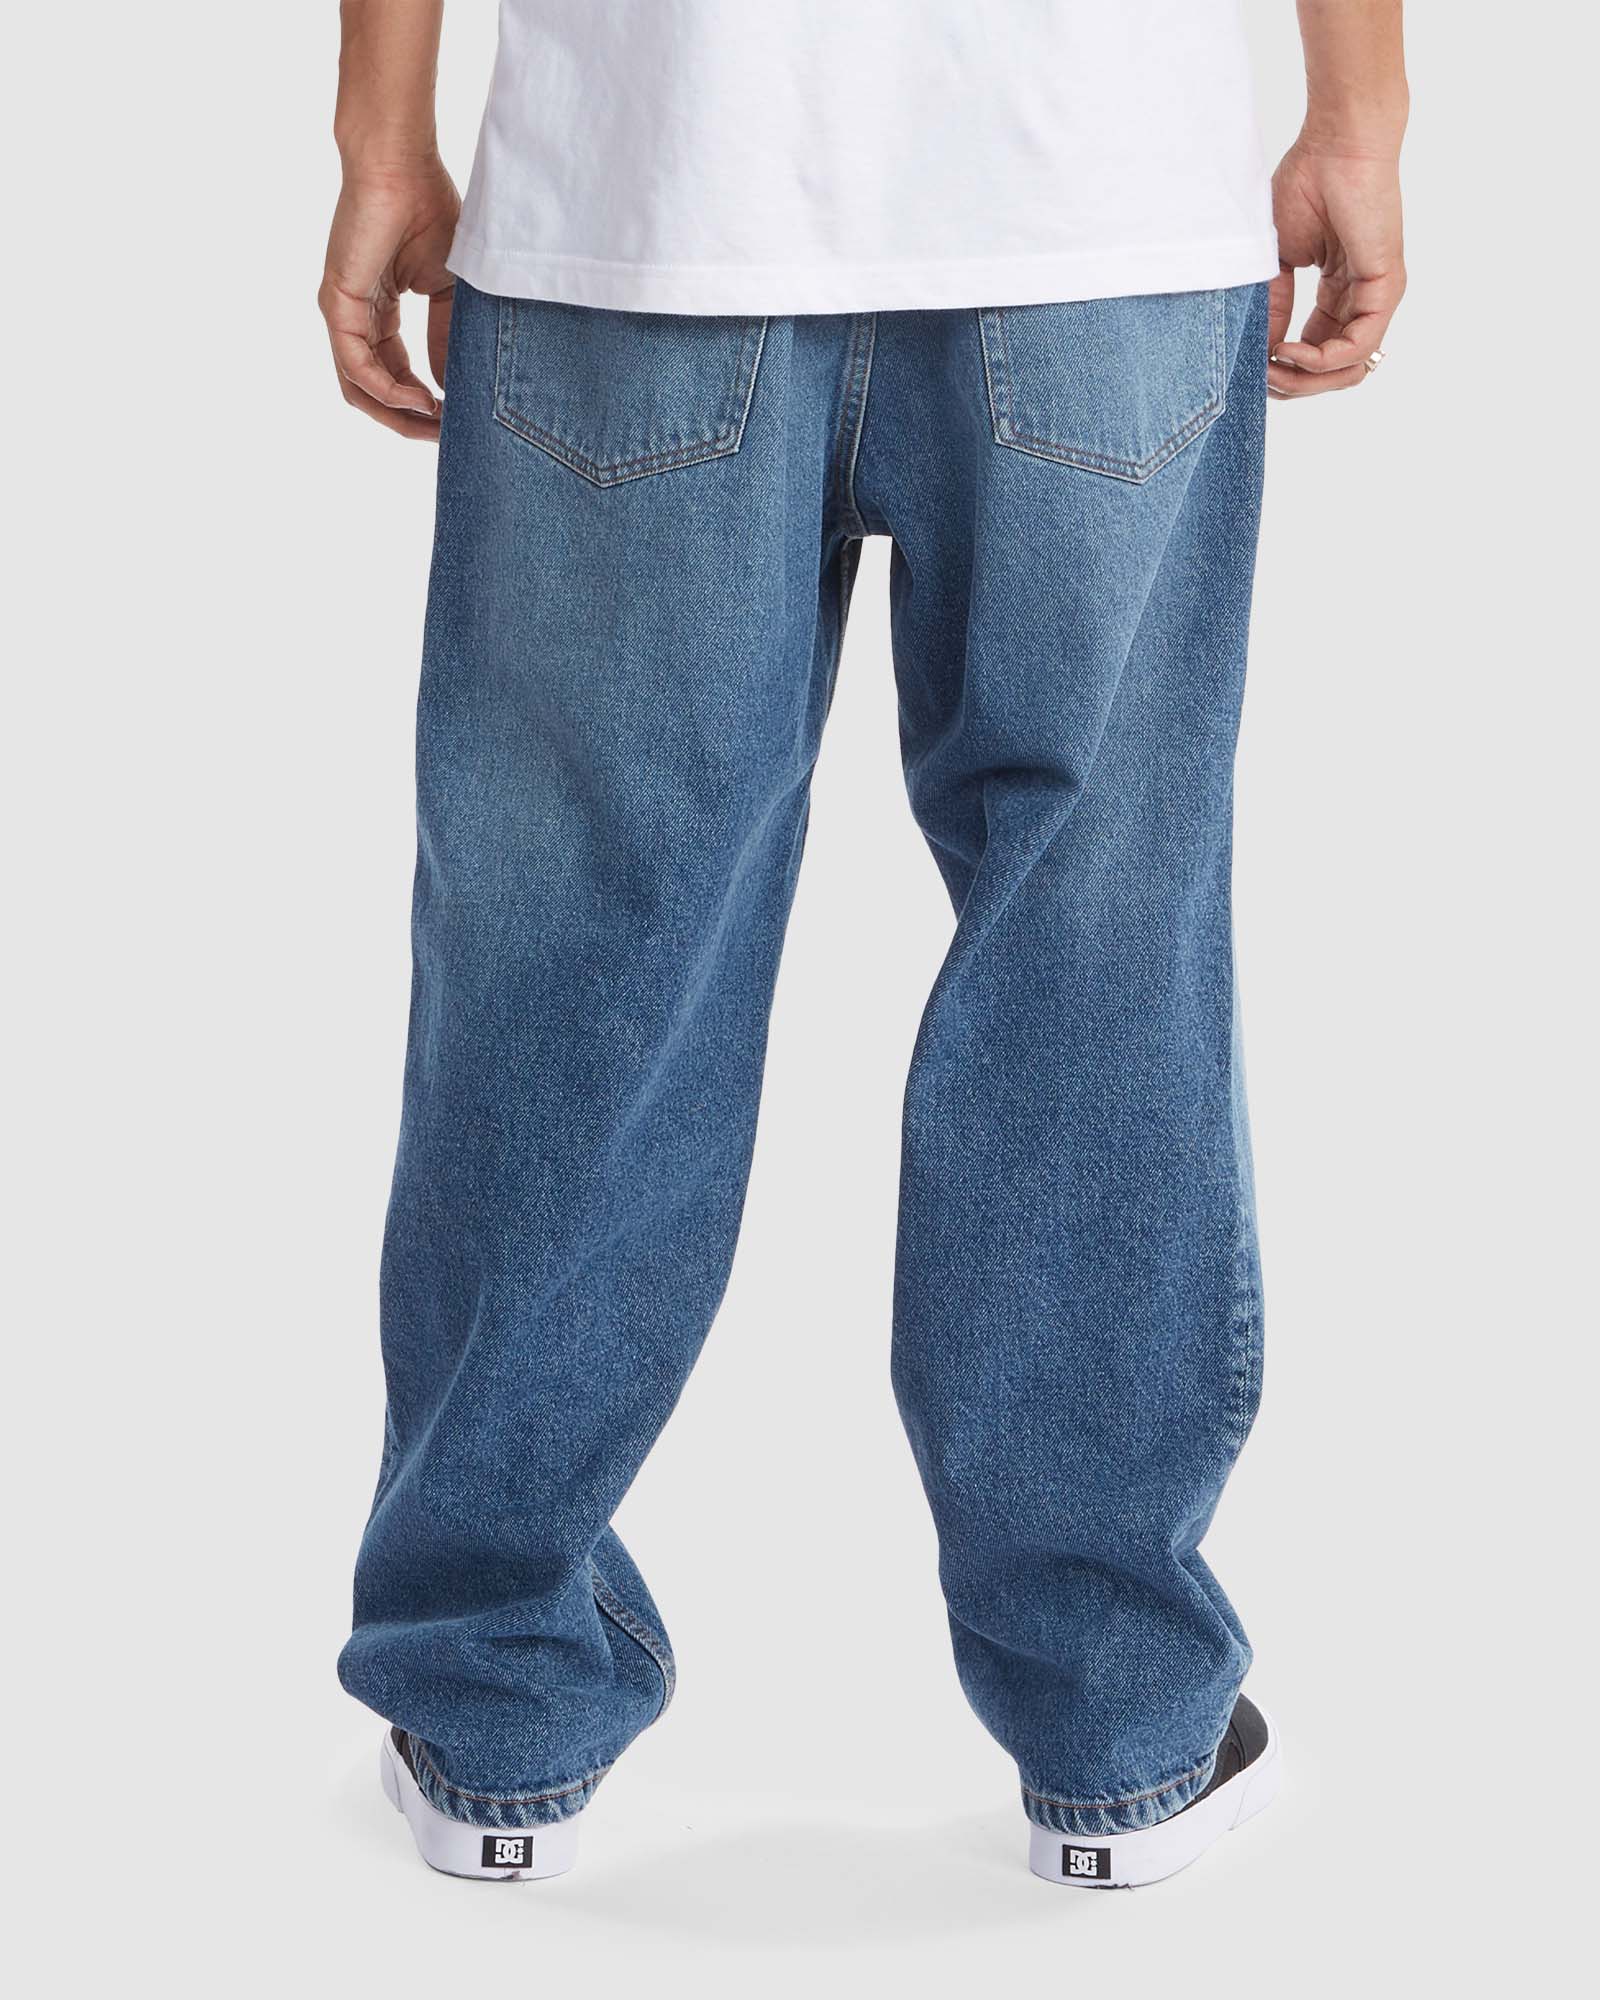 Mens Worker Baggy Jeans by DC SHOES | Surf, Dive 'N' Ski